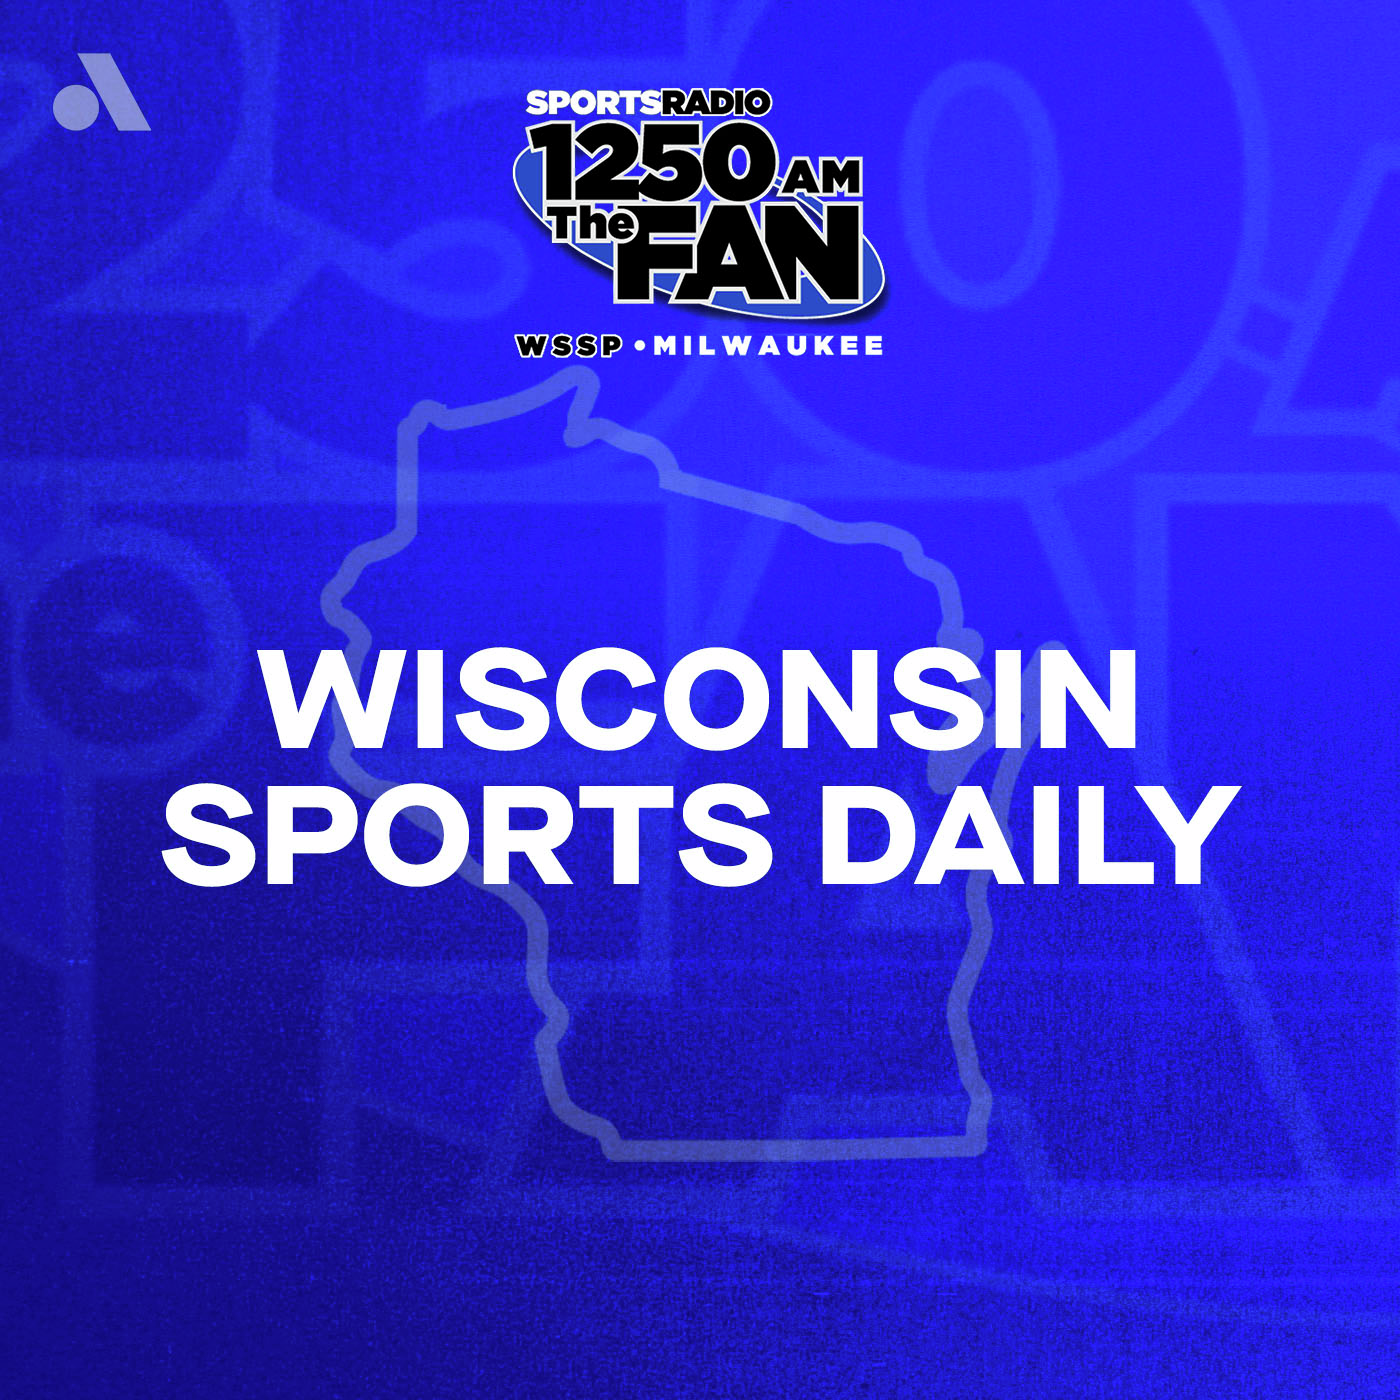 Tuesday, June 11th: It's Tuesdays With Tim Dillard on Wisconsin Sports Daily!